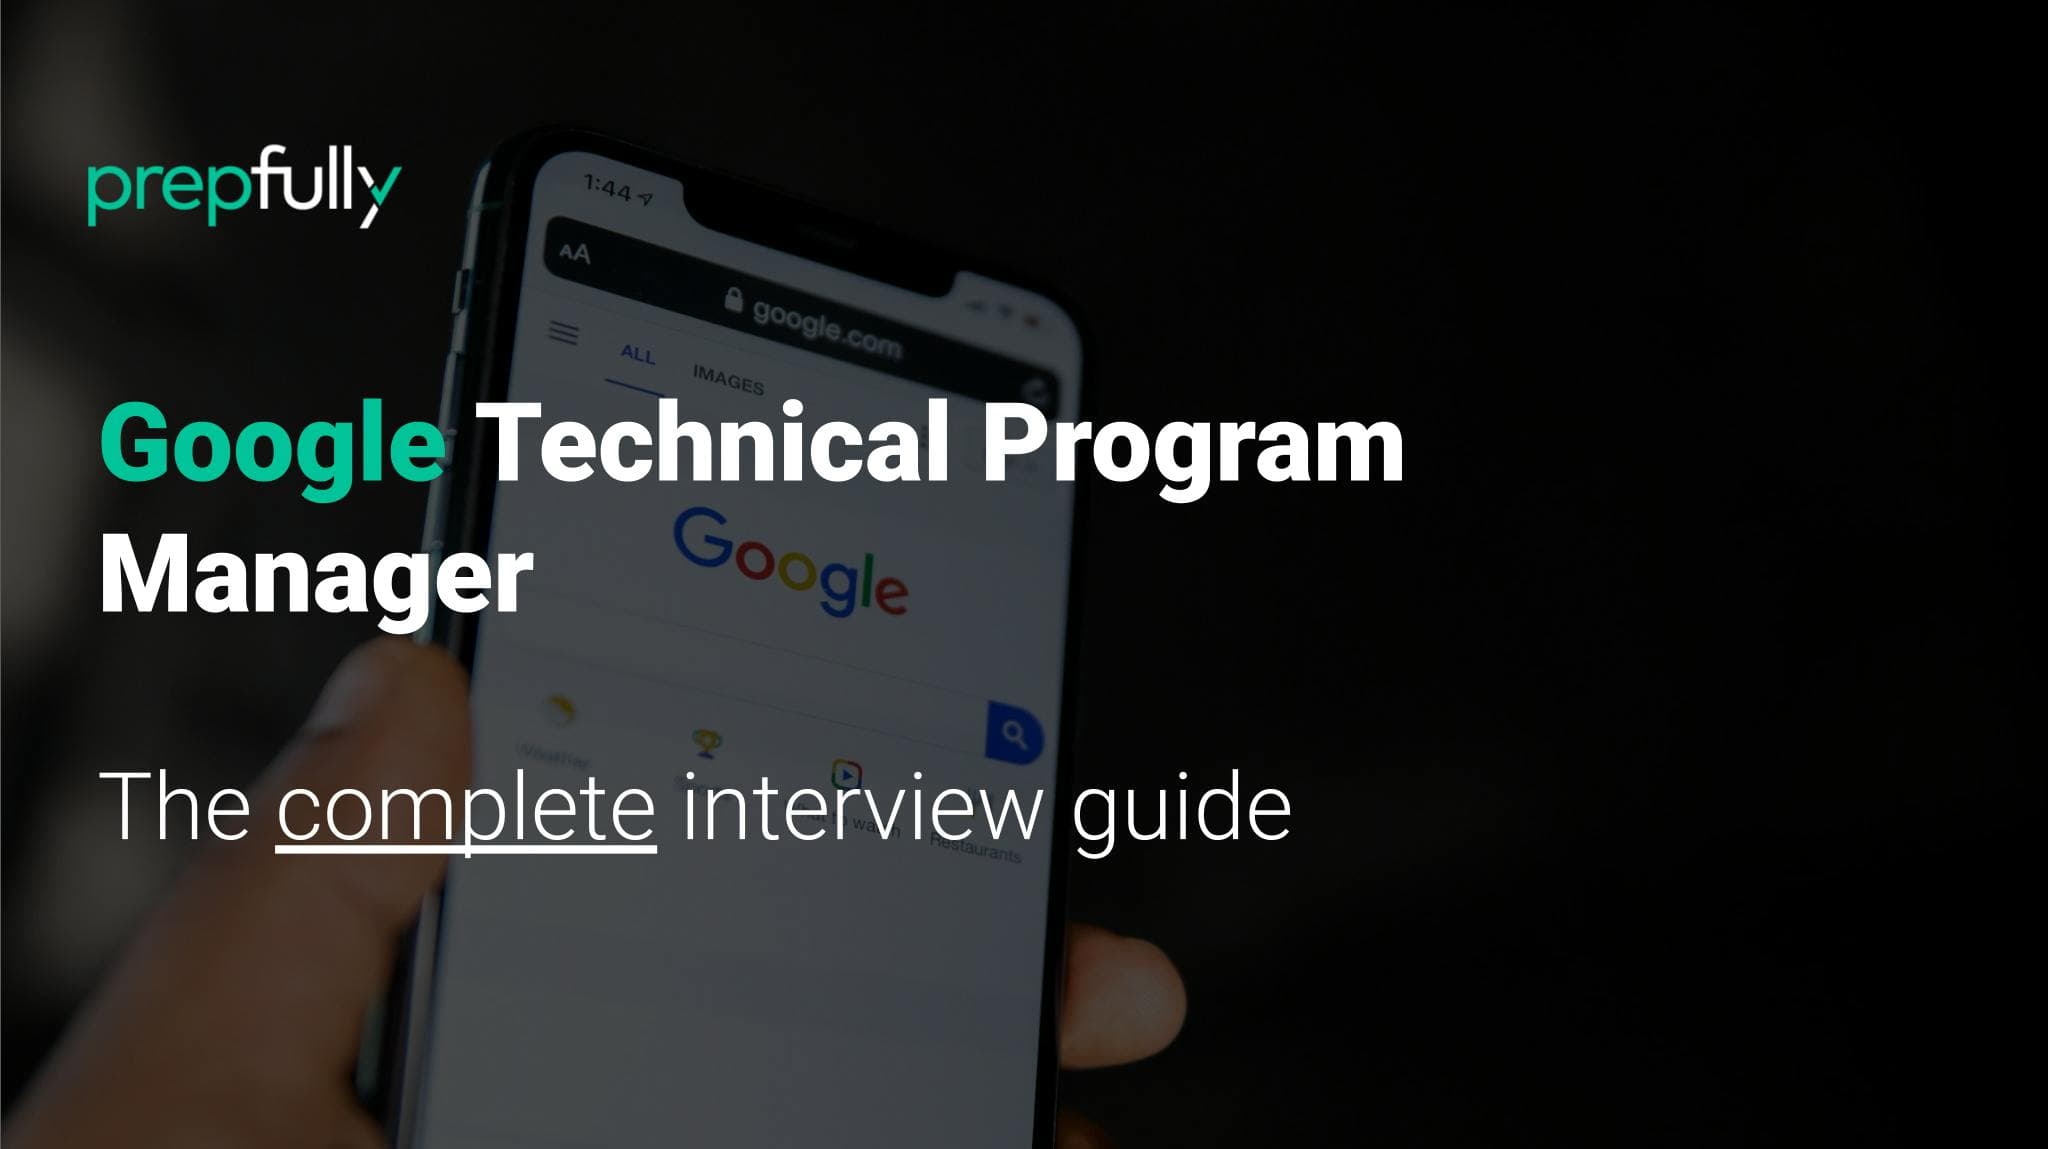 Interview guide for Google Technical Program Manager